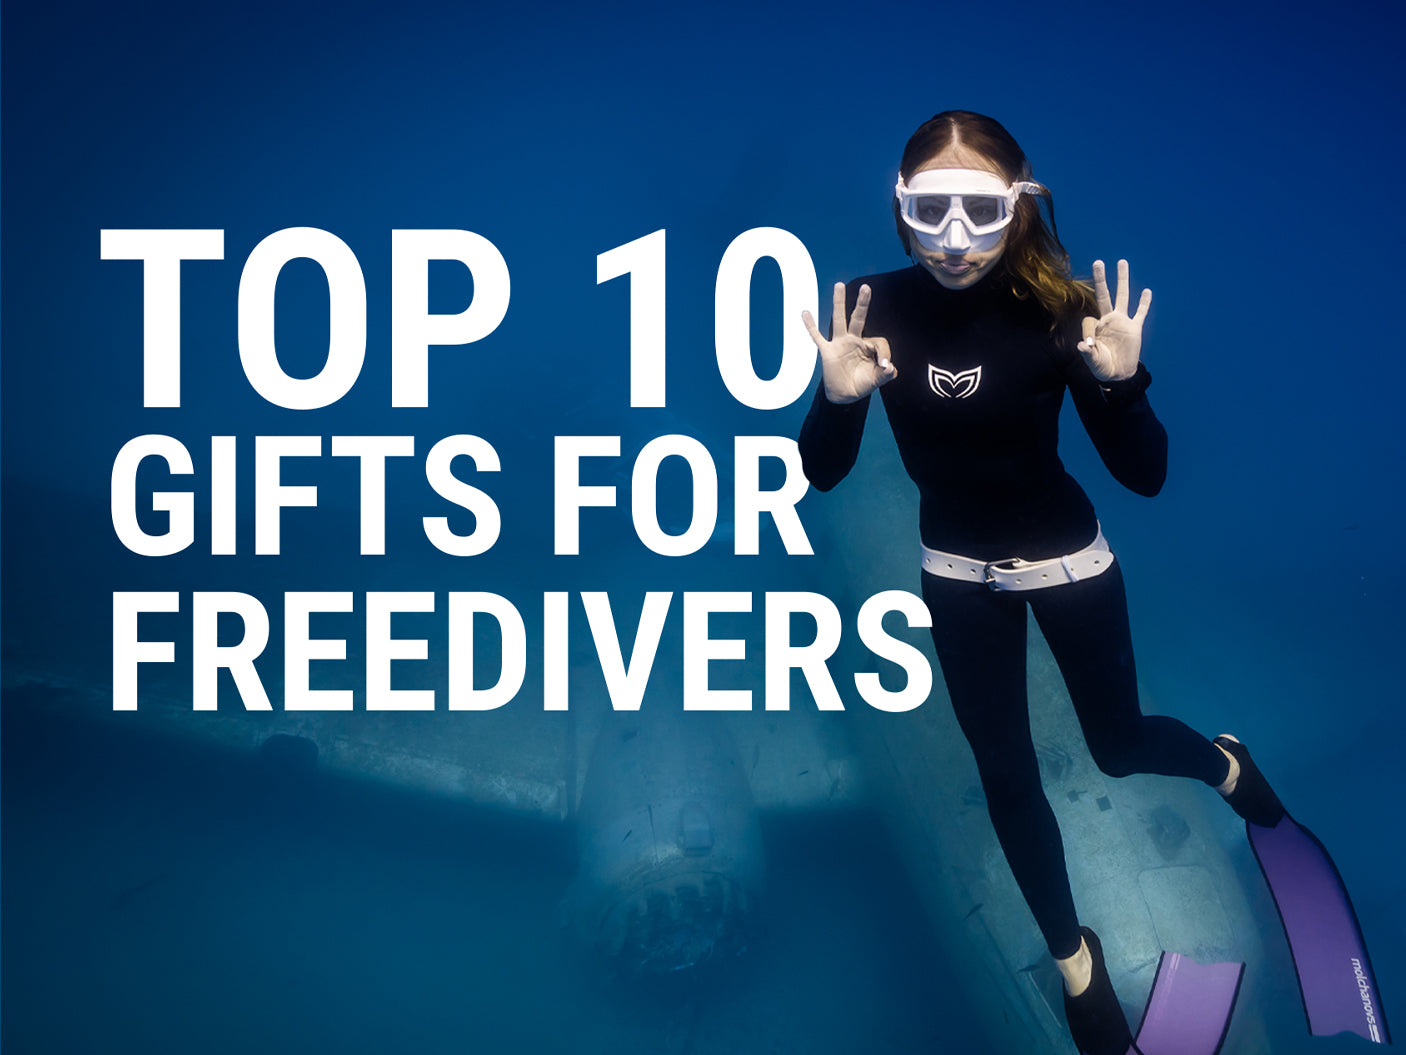 Top 10 Gifts for Freedivers